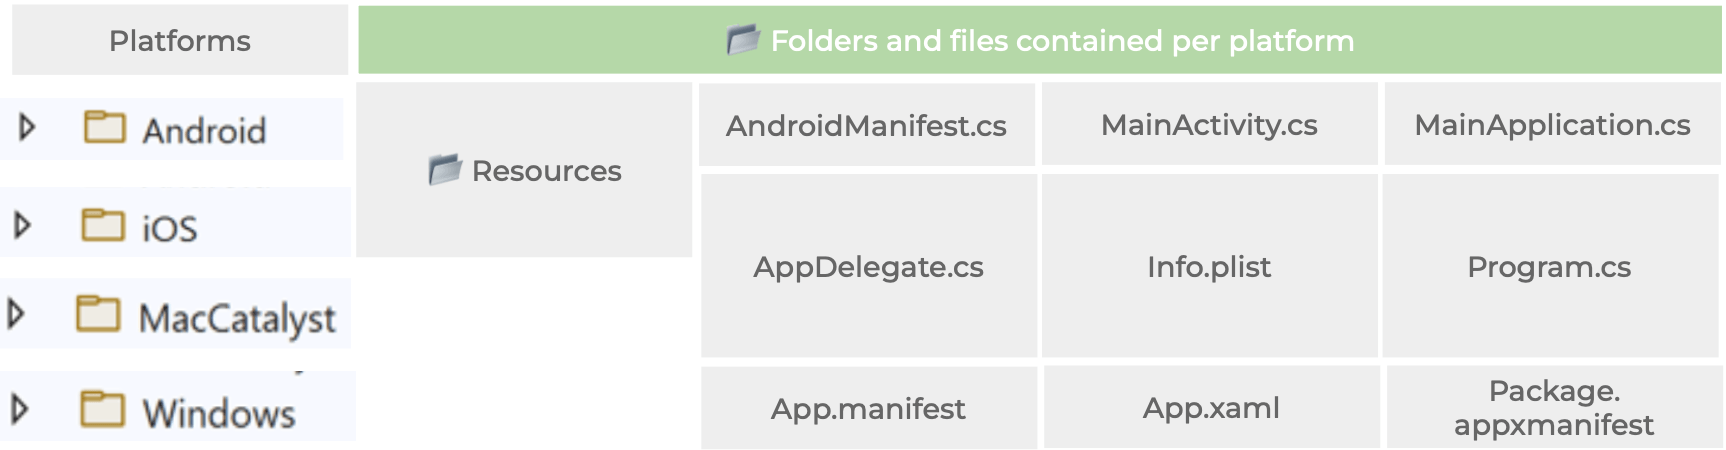 Folders and files contained per platform. For Android: Resources, AndroidManifest, MainActivity & MainApplication. For iOS & MacCatalyst: Resources -only for IOS-, AppDelegate, Info.plist & Program. For Windows: App.manifest, App.xaml and Package.appmanifest.